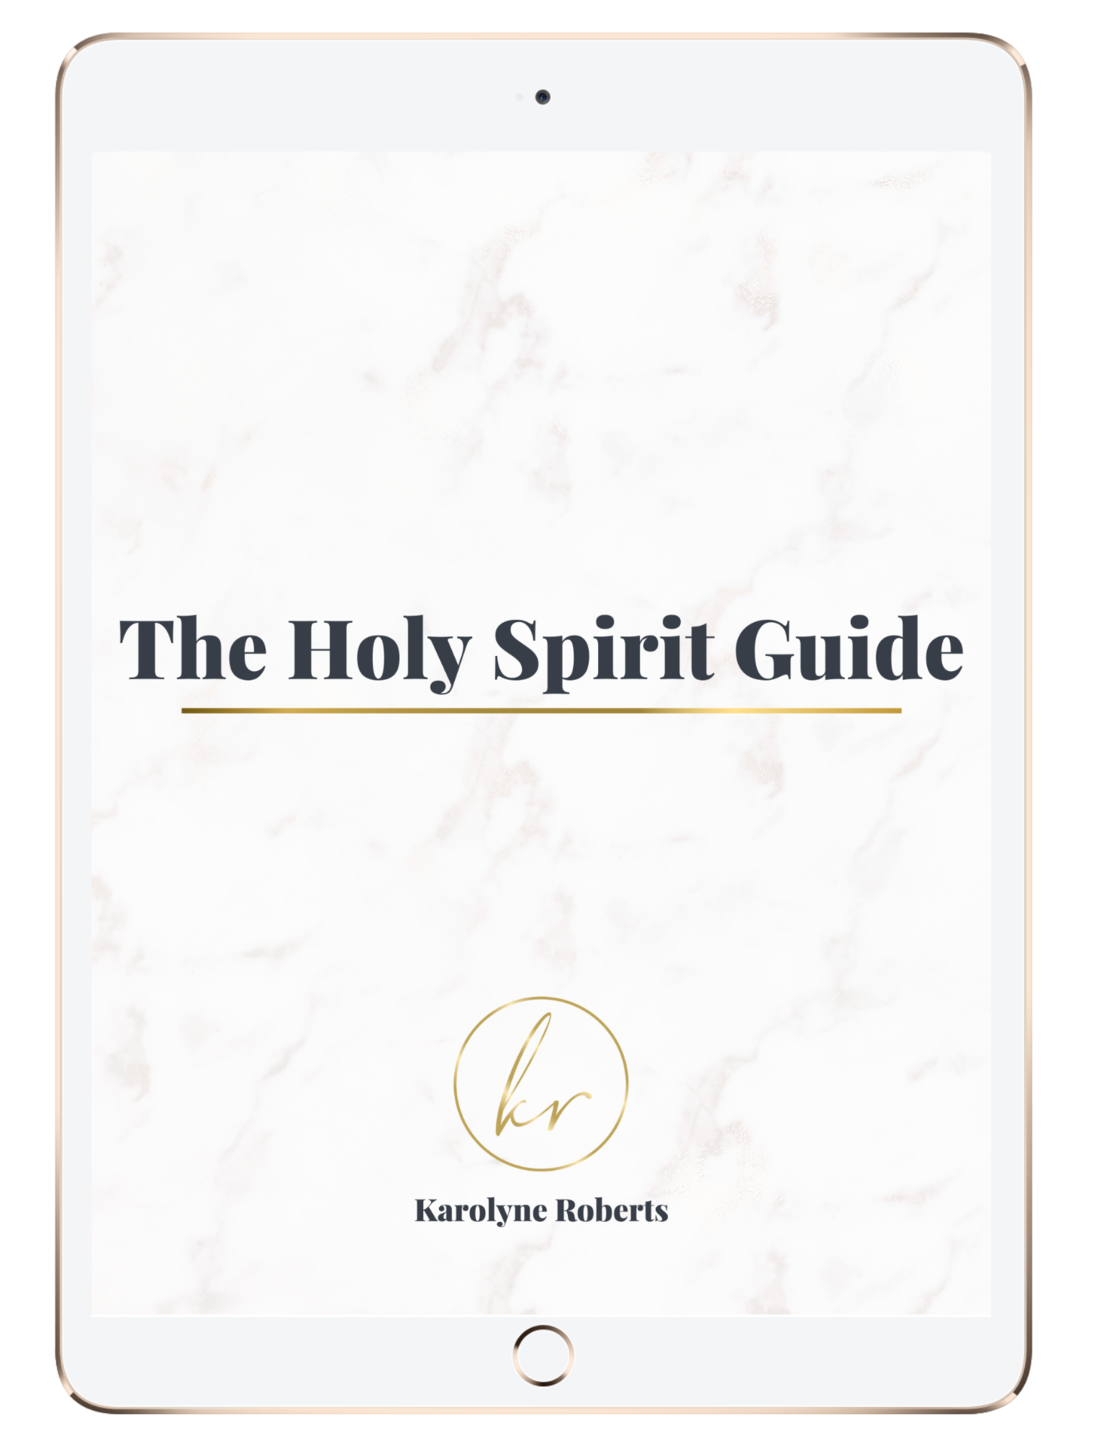 The Holy Spirit Guide